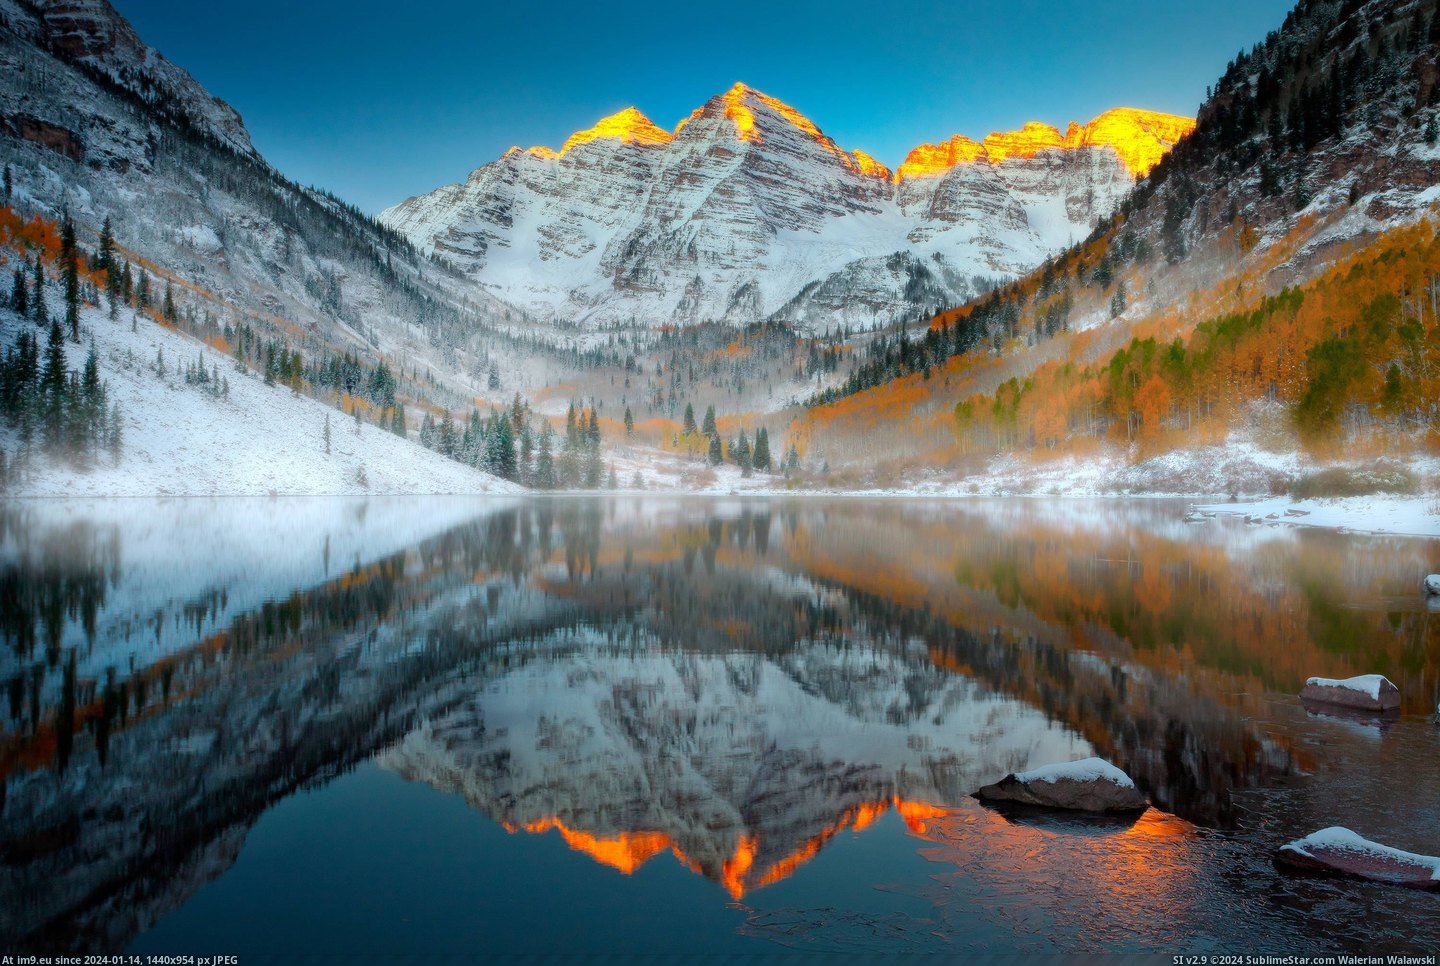 #Winter #Colorado #Sunrise #Aspen #Maroon #Mcneal #Wilderness #Kevin #Bells [Earthporn] Maroon Bells Sunrise In Winter - Maroon Bells Wilderness, Aspen, Colorado [3,000x2000] by Kevin McNeal Pic. (Изображение из альбом My r/EARTHPORN favs))